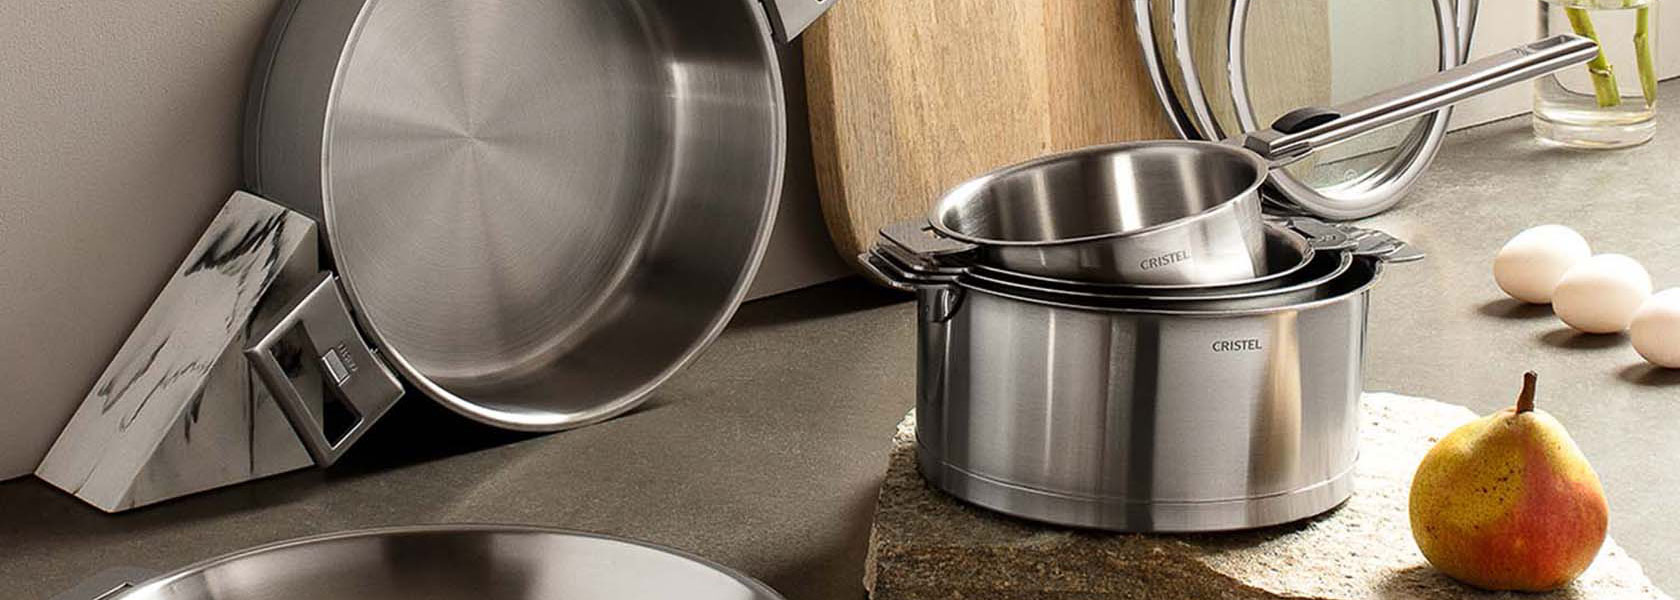 Cristel stainless steel cookware